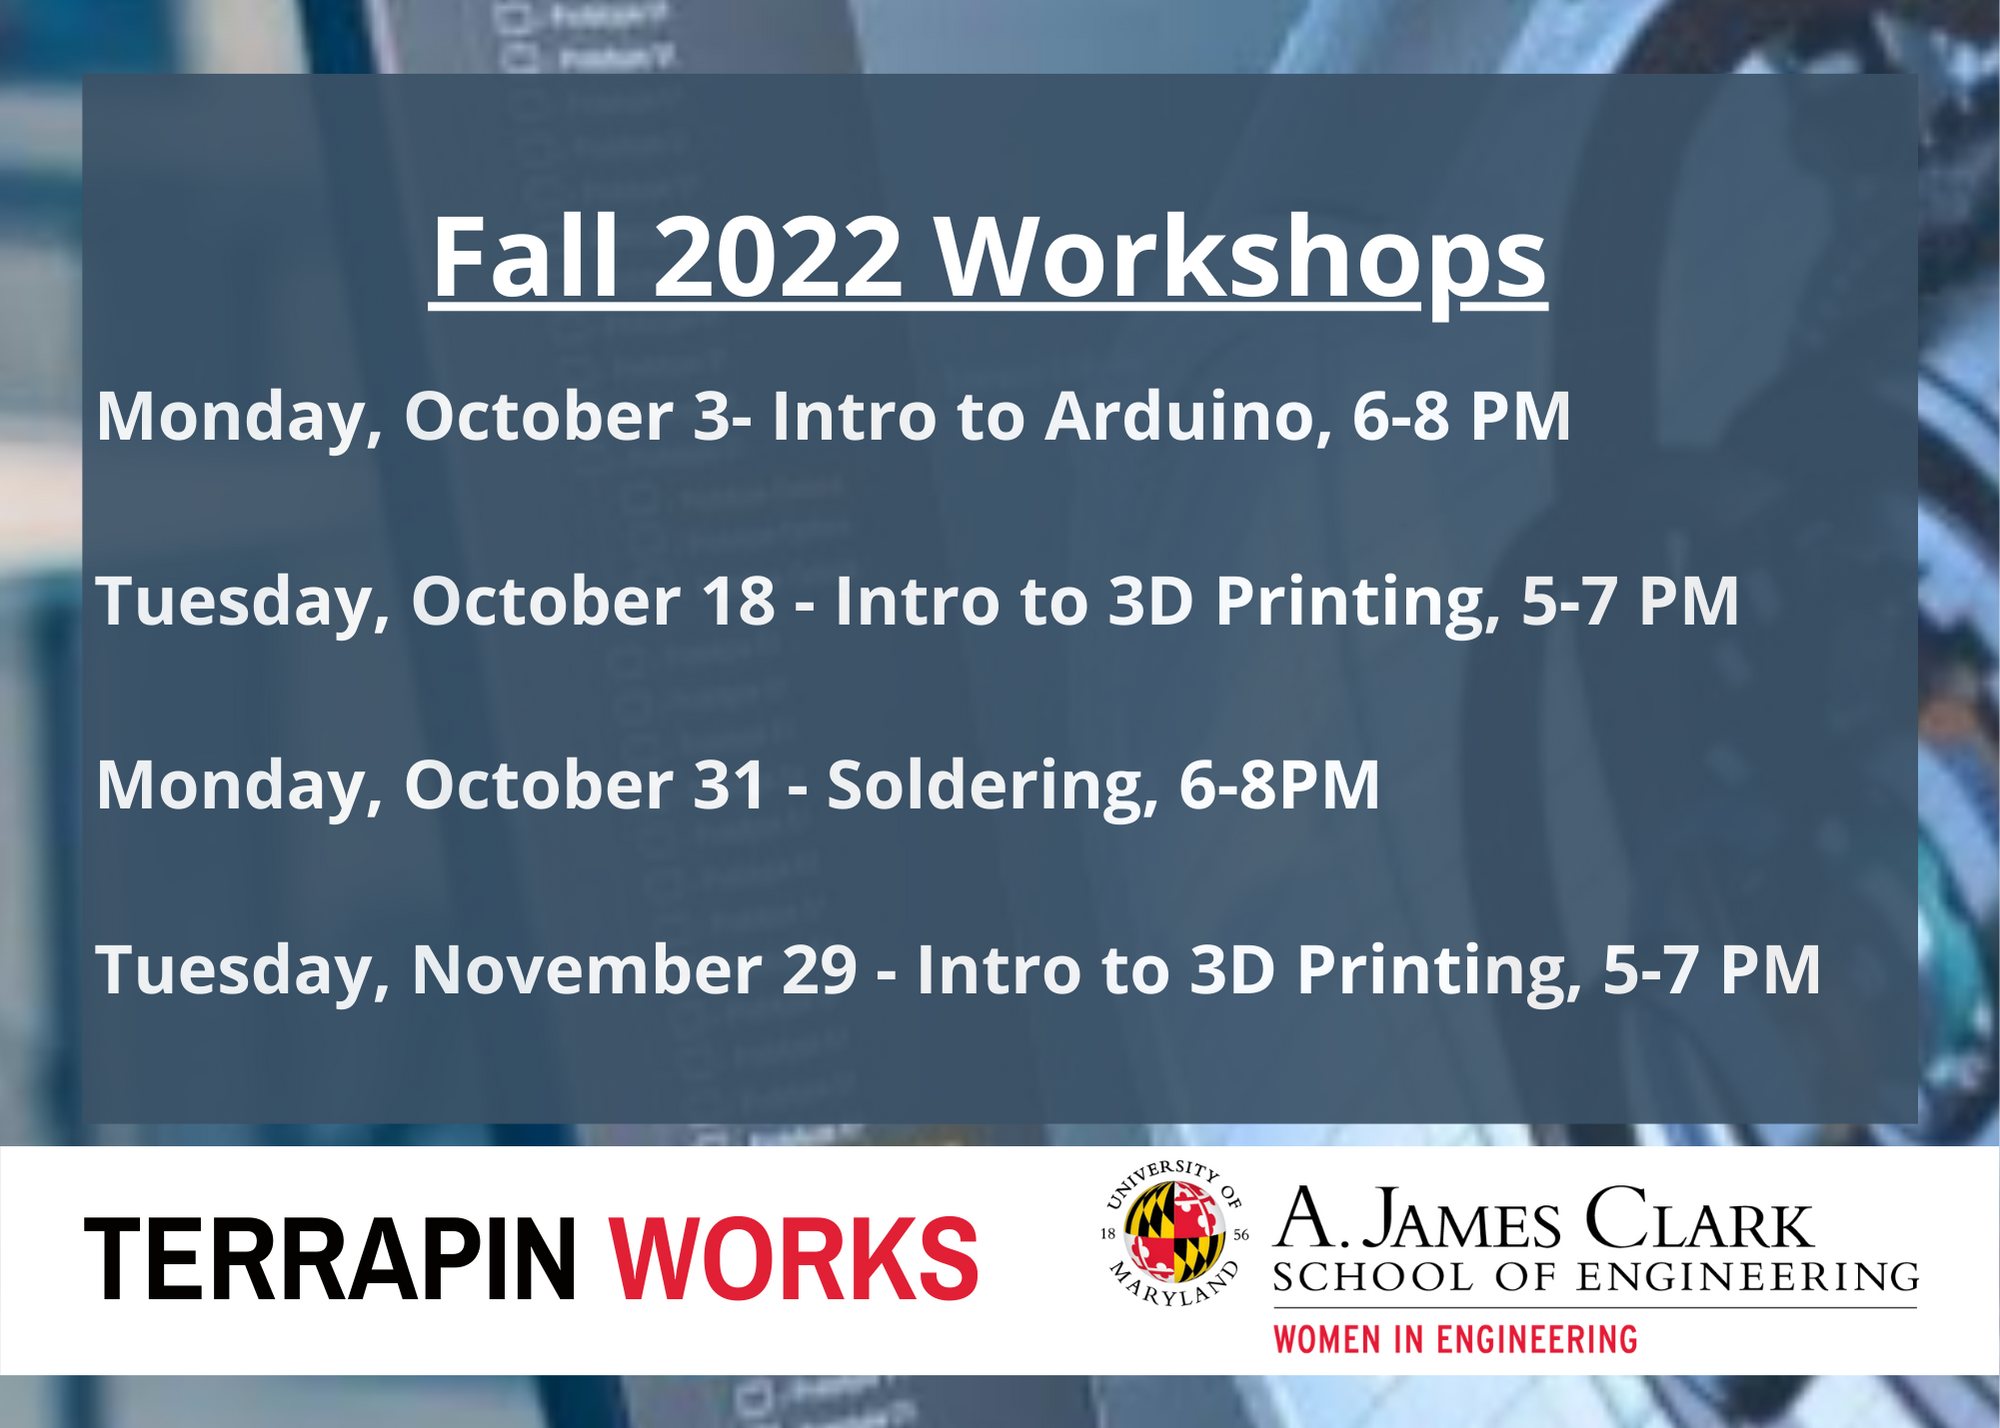 Terrapin Works Fall 2022 Events Schedule